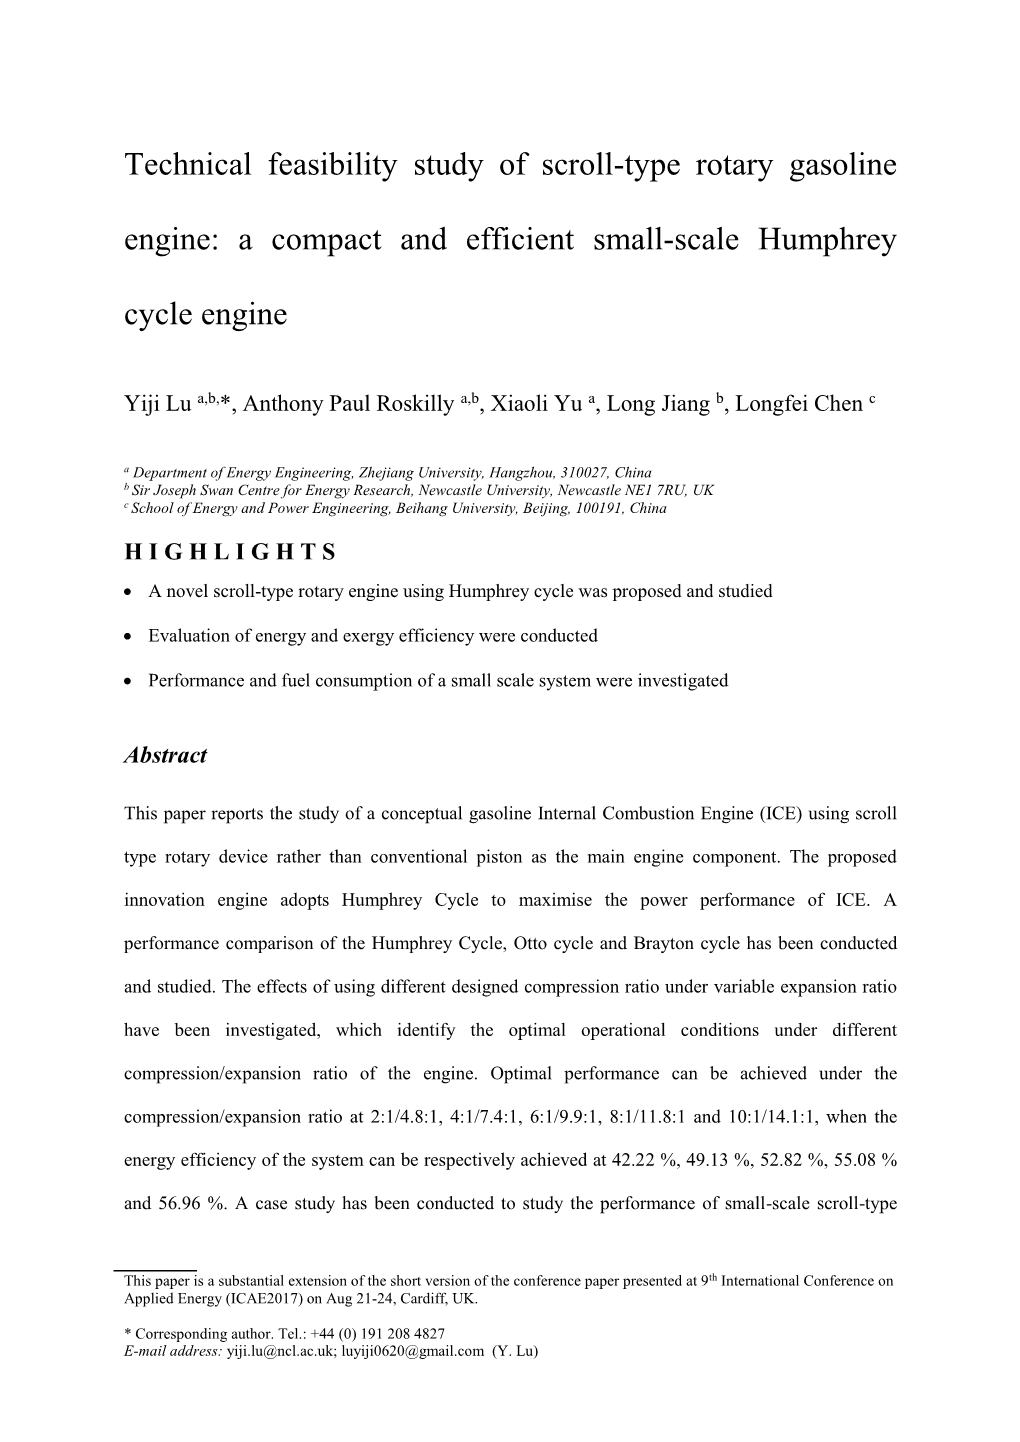 Technical Feasibility Study of Scroll-Type Rotary Gasoline Engine: a Compact and Efficient Small-Scale Humphrey Cycle Engine